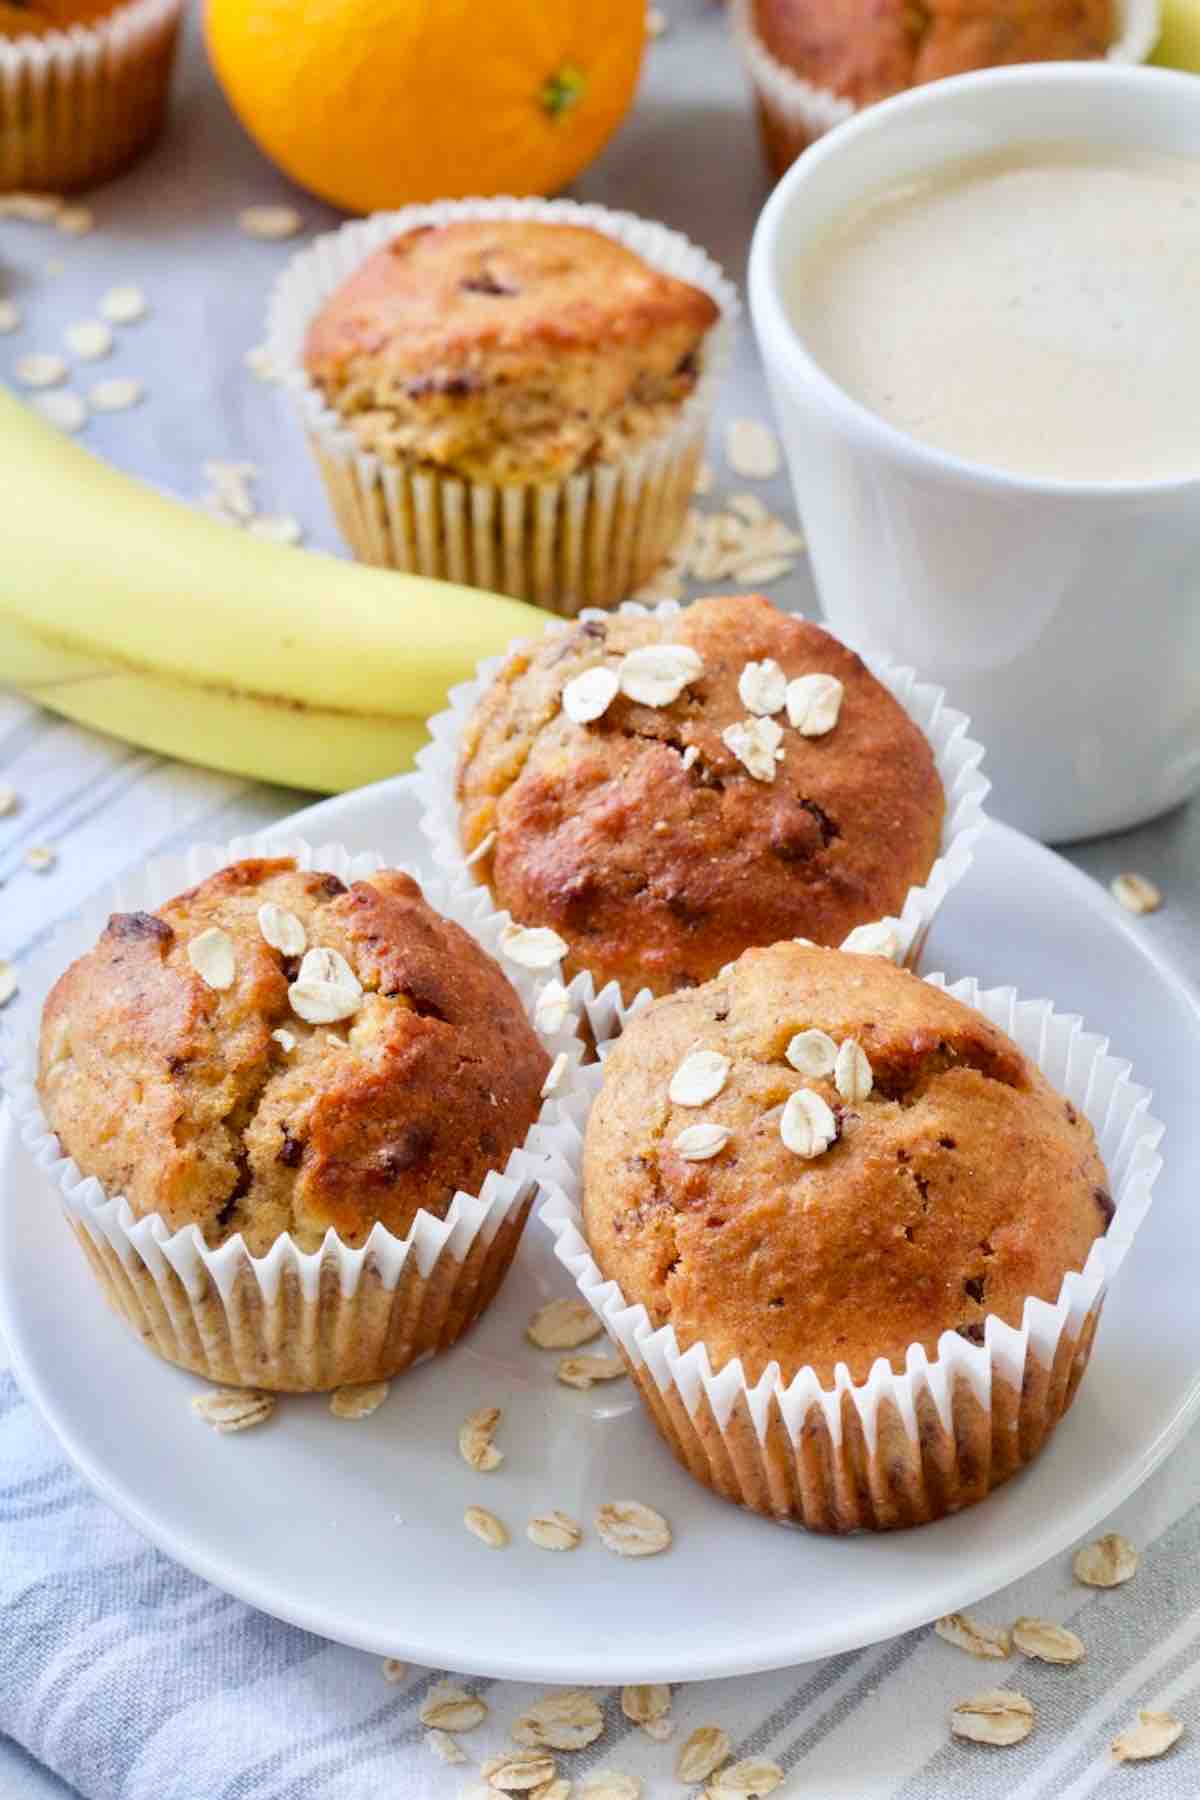 Three vegan banana muffins on a plate with coffee behind.